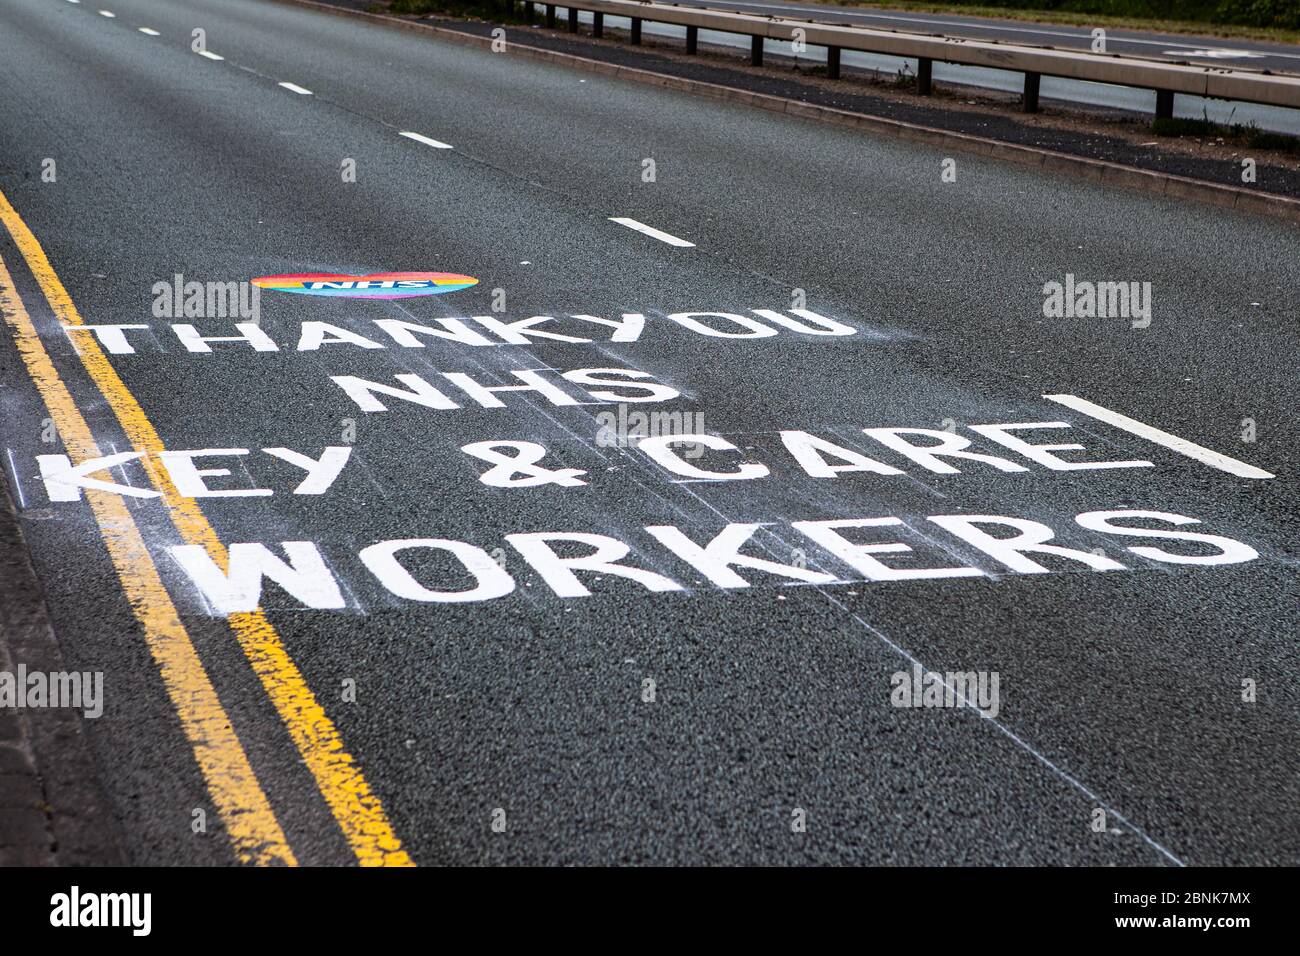 Dudley, West Midlands, UK. 15th May, 2020. A message of appreciation and thanks to the NHS, Key and Care Workers is painted on the surface of a busy dual carriageway on the approach to Russells Hall Hospital.The painted message has appeared overnight thanking the workers during the Covid-19 pandemic. Credit: Anthony Wallbank/Alamy Live News Stock Photo